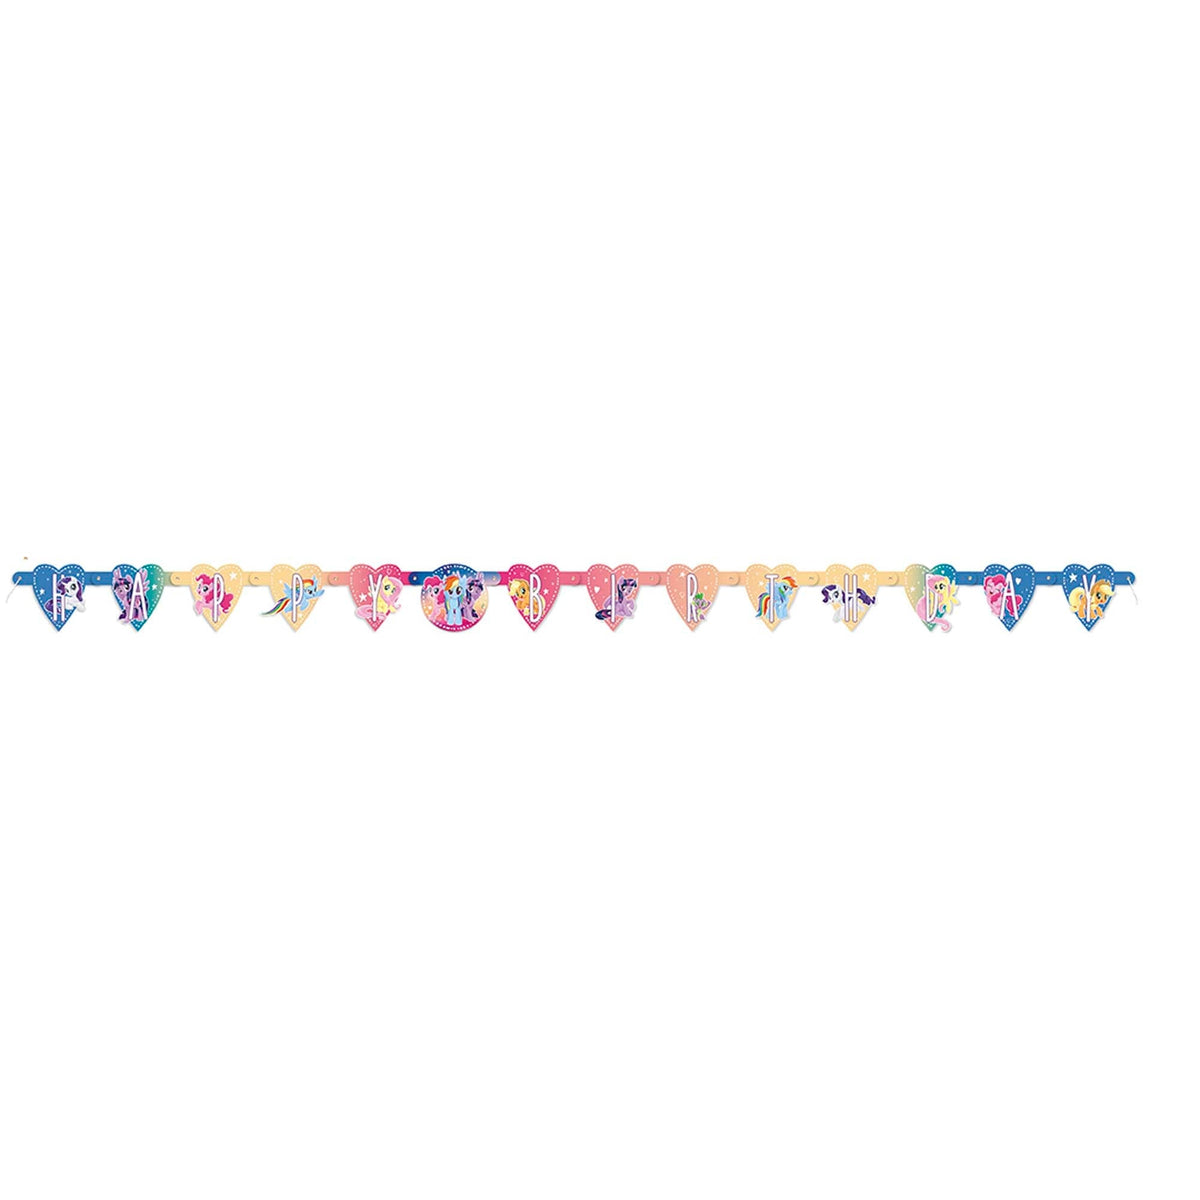 UNIQUE PARTY FAVORS Kids Birthday My Little Pony Happy Birthday Paper Jointed Banner, 1 Count